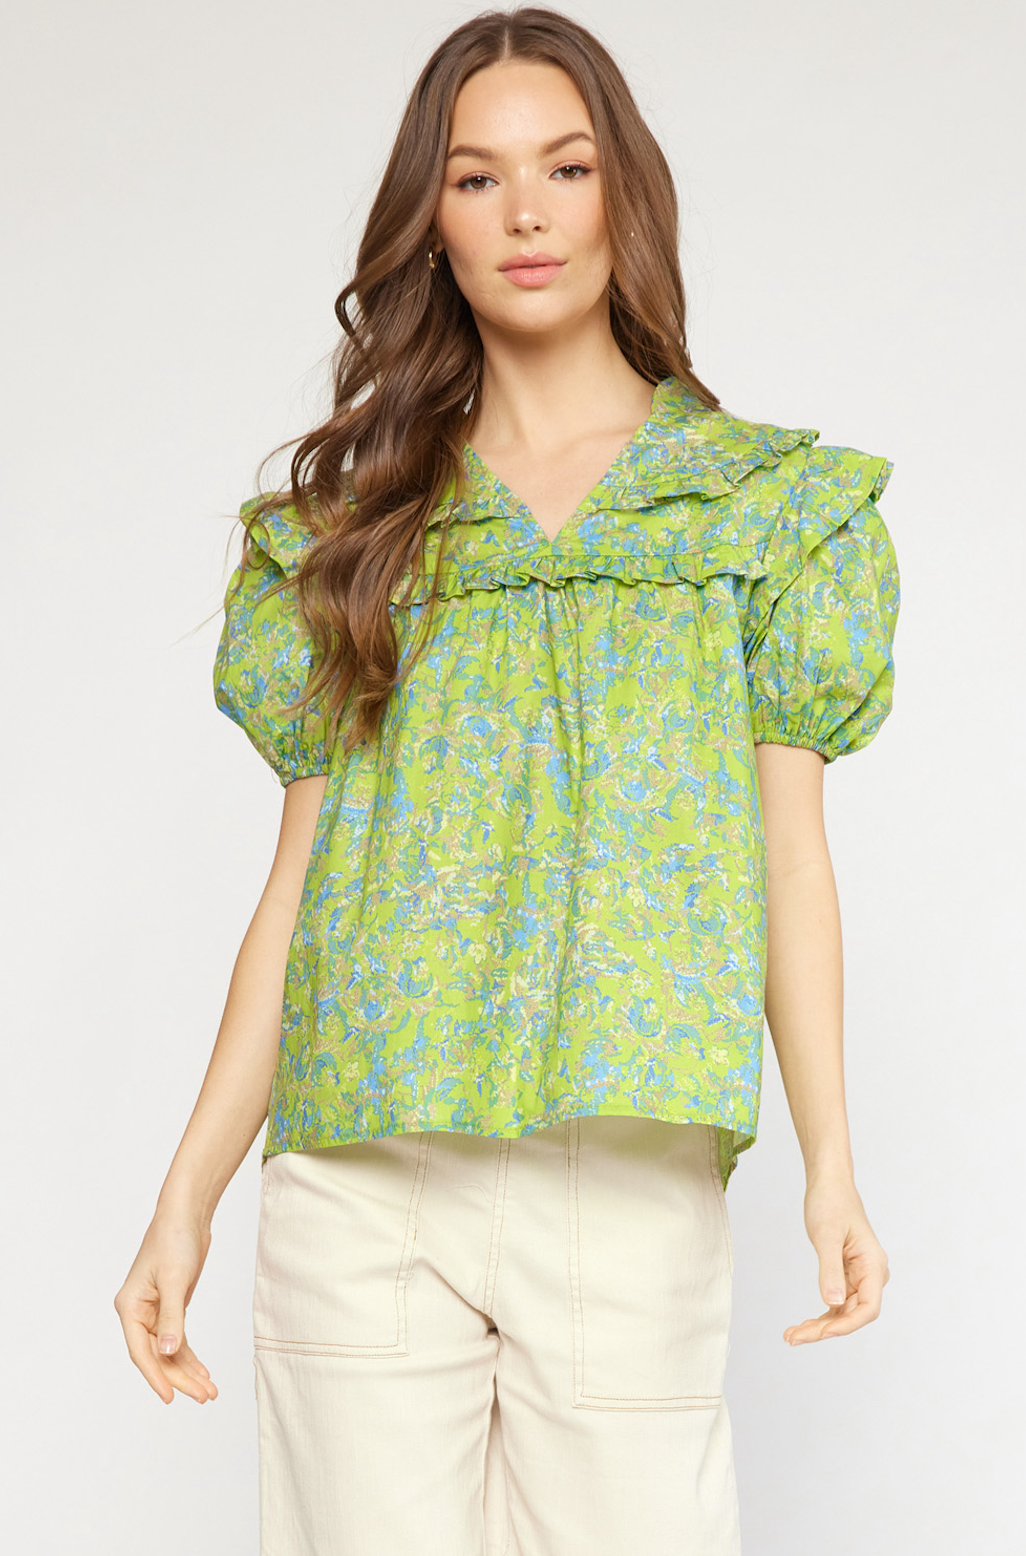 SIMON PRINTED BLOUSE IN CHARTREUSE